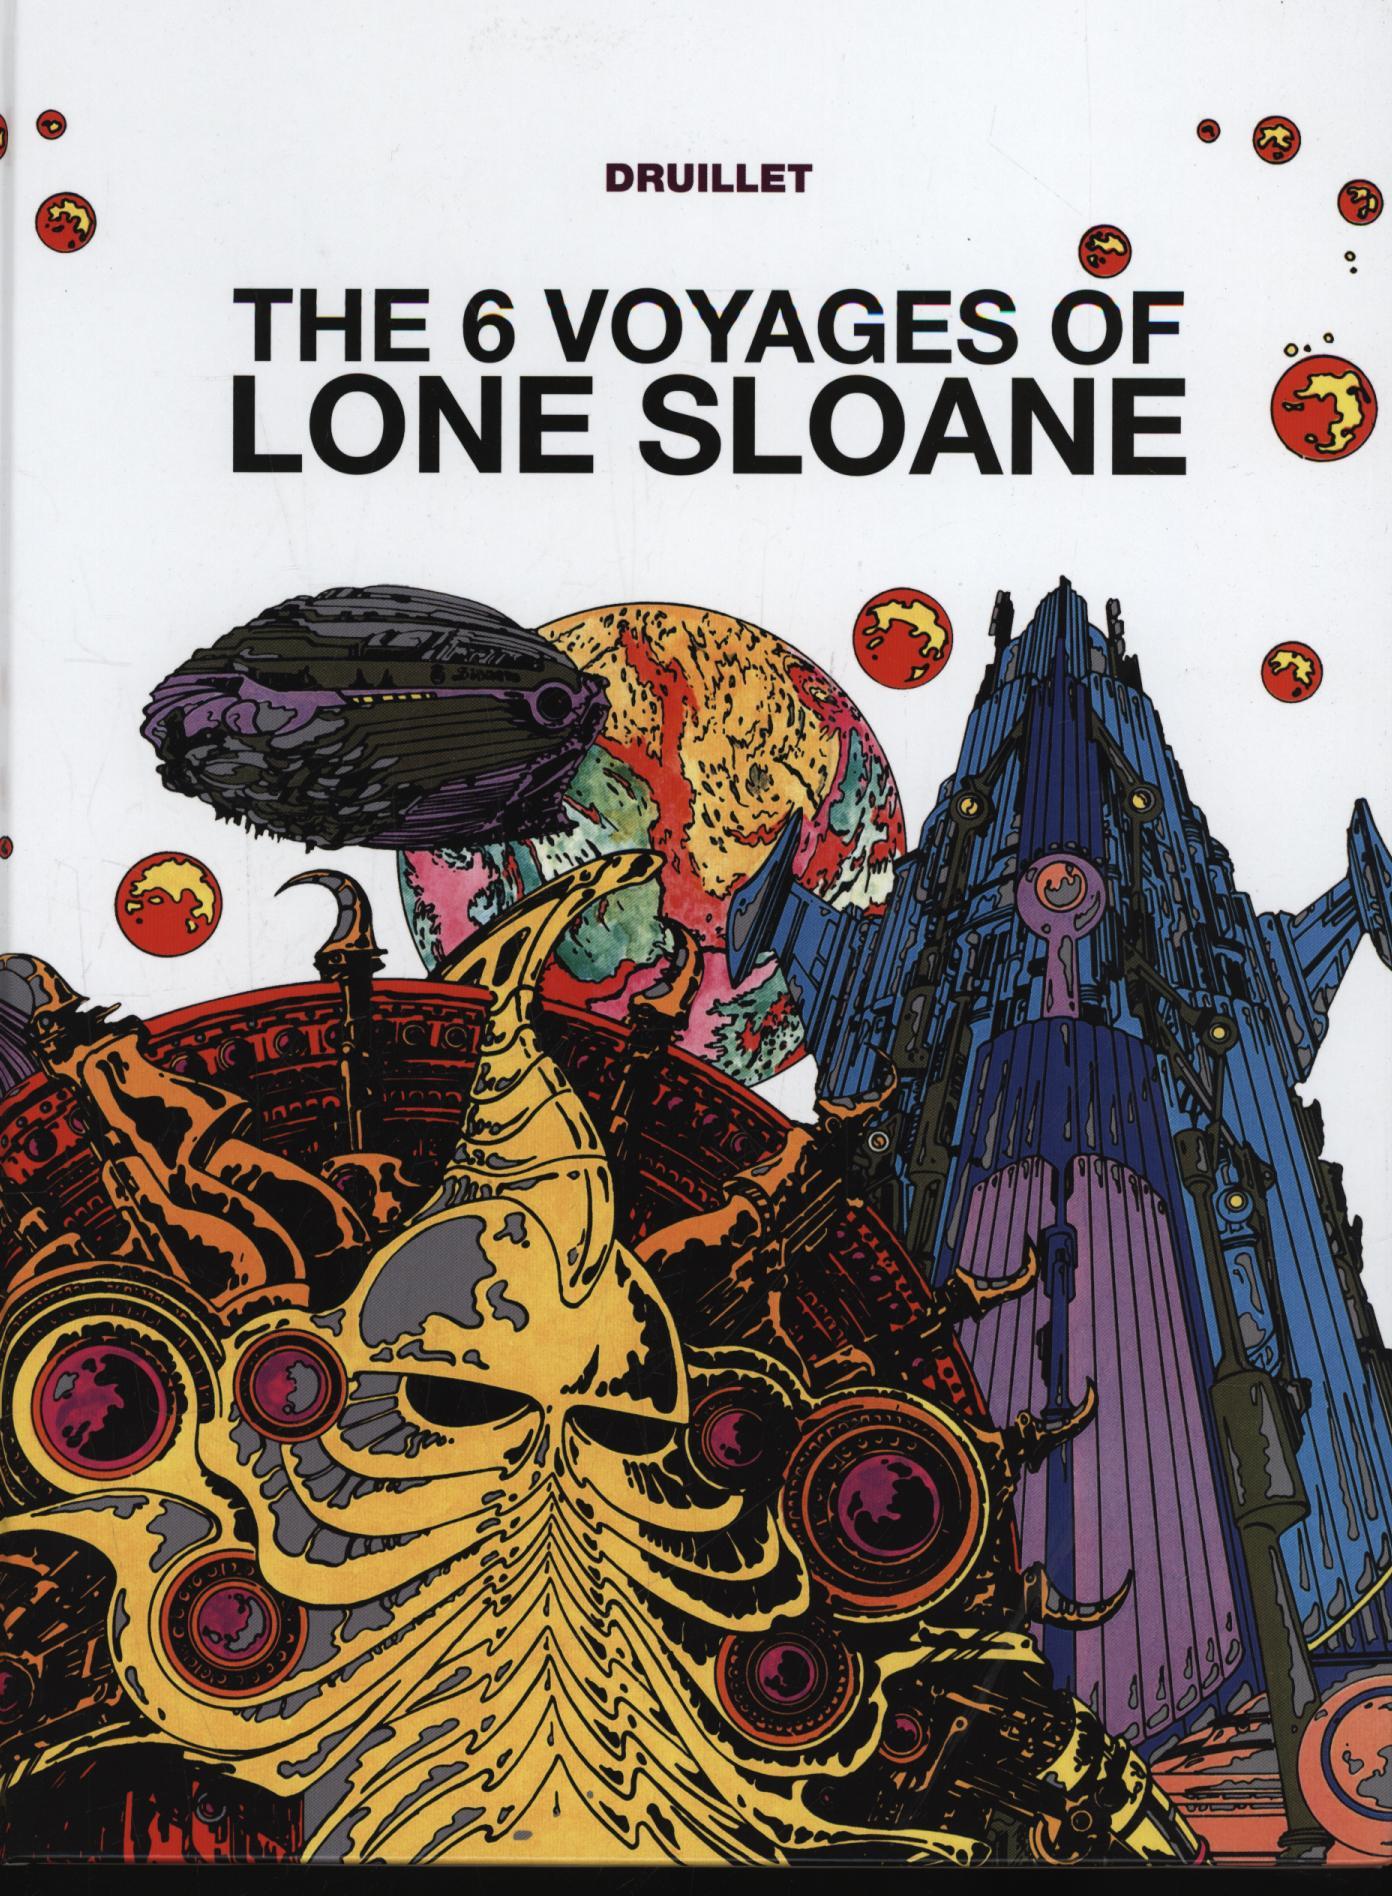 'The 6 Voyages of Lone Sloane'